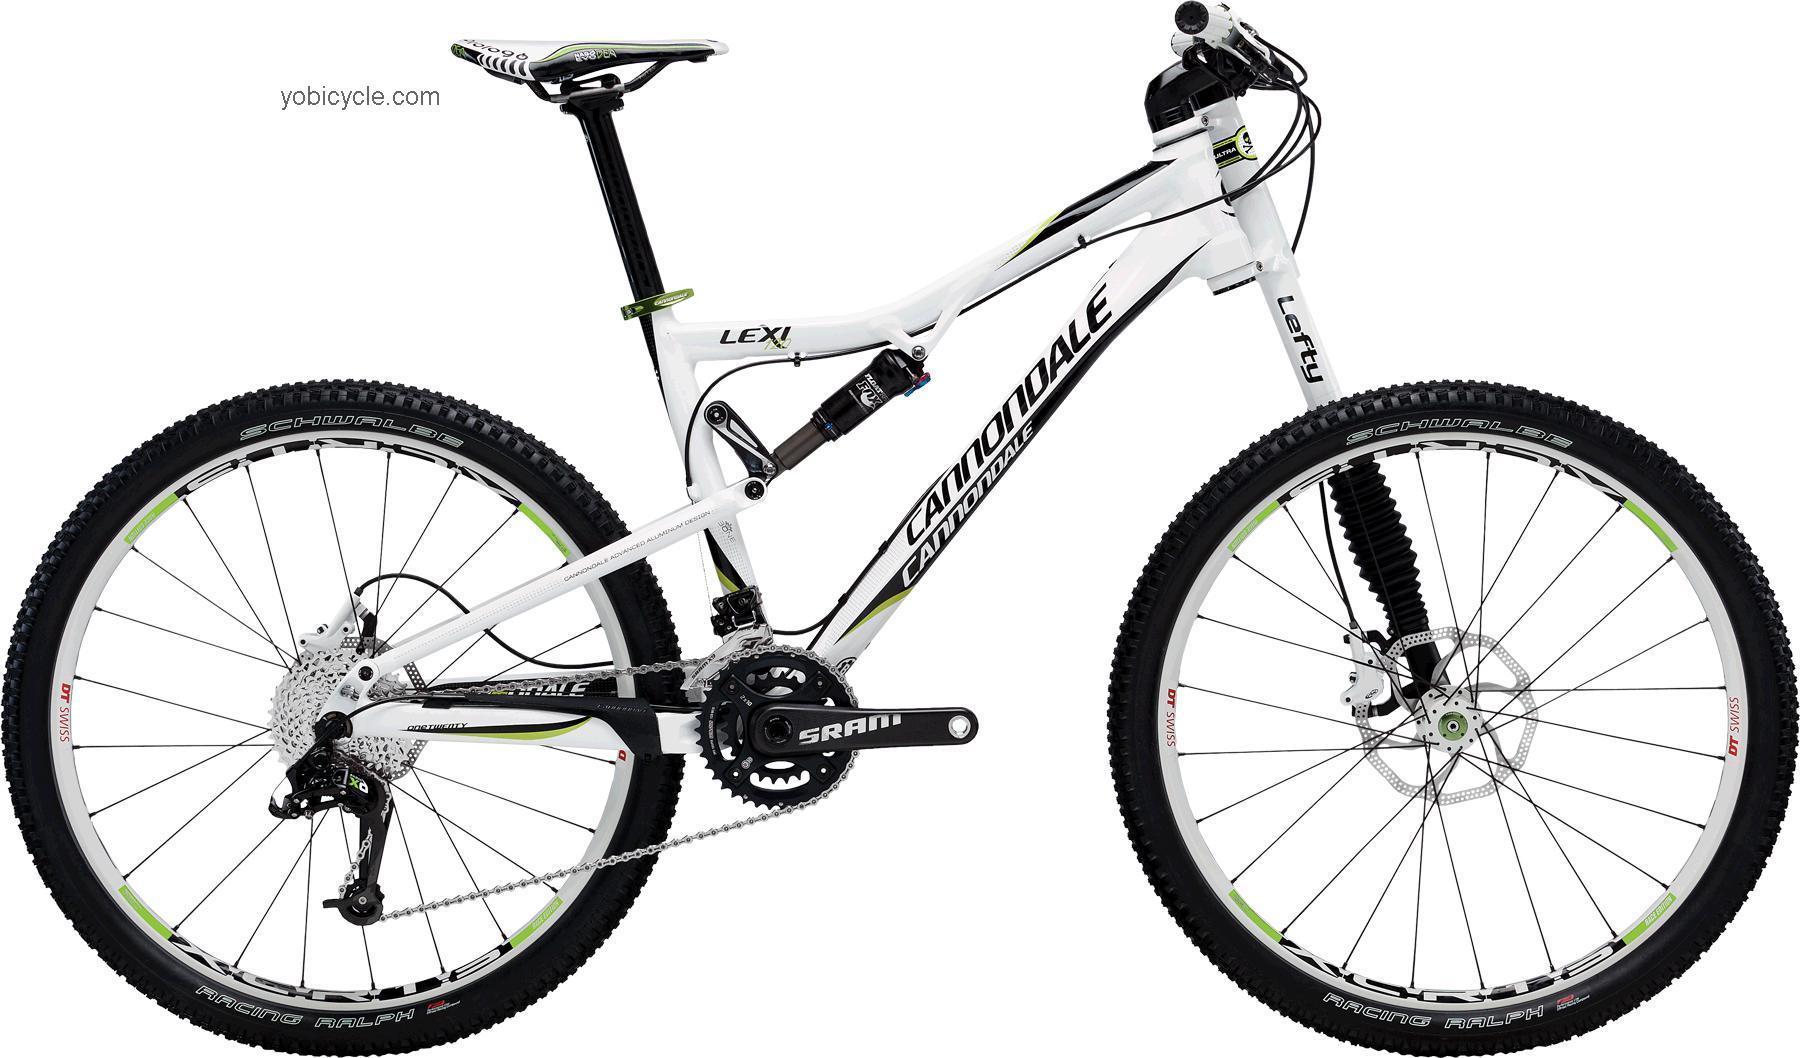 Cannondale Lexi 0 competitors and comparison tool online specs and performance